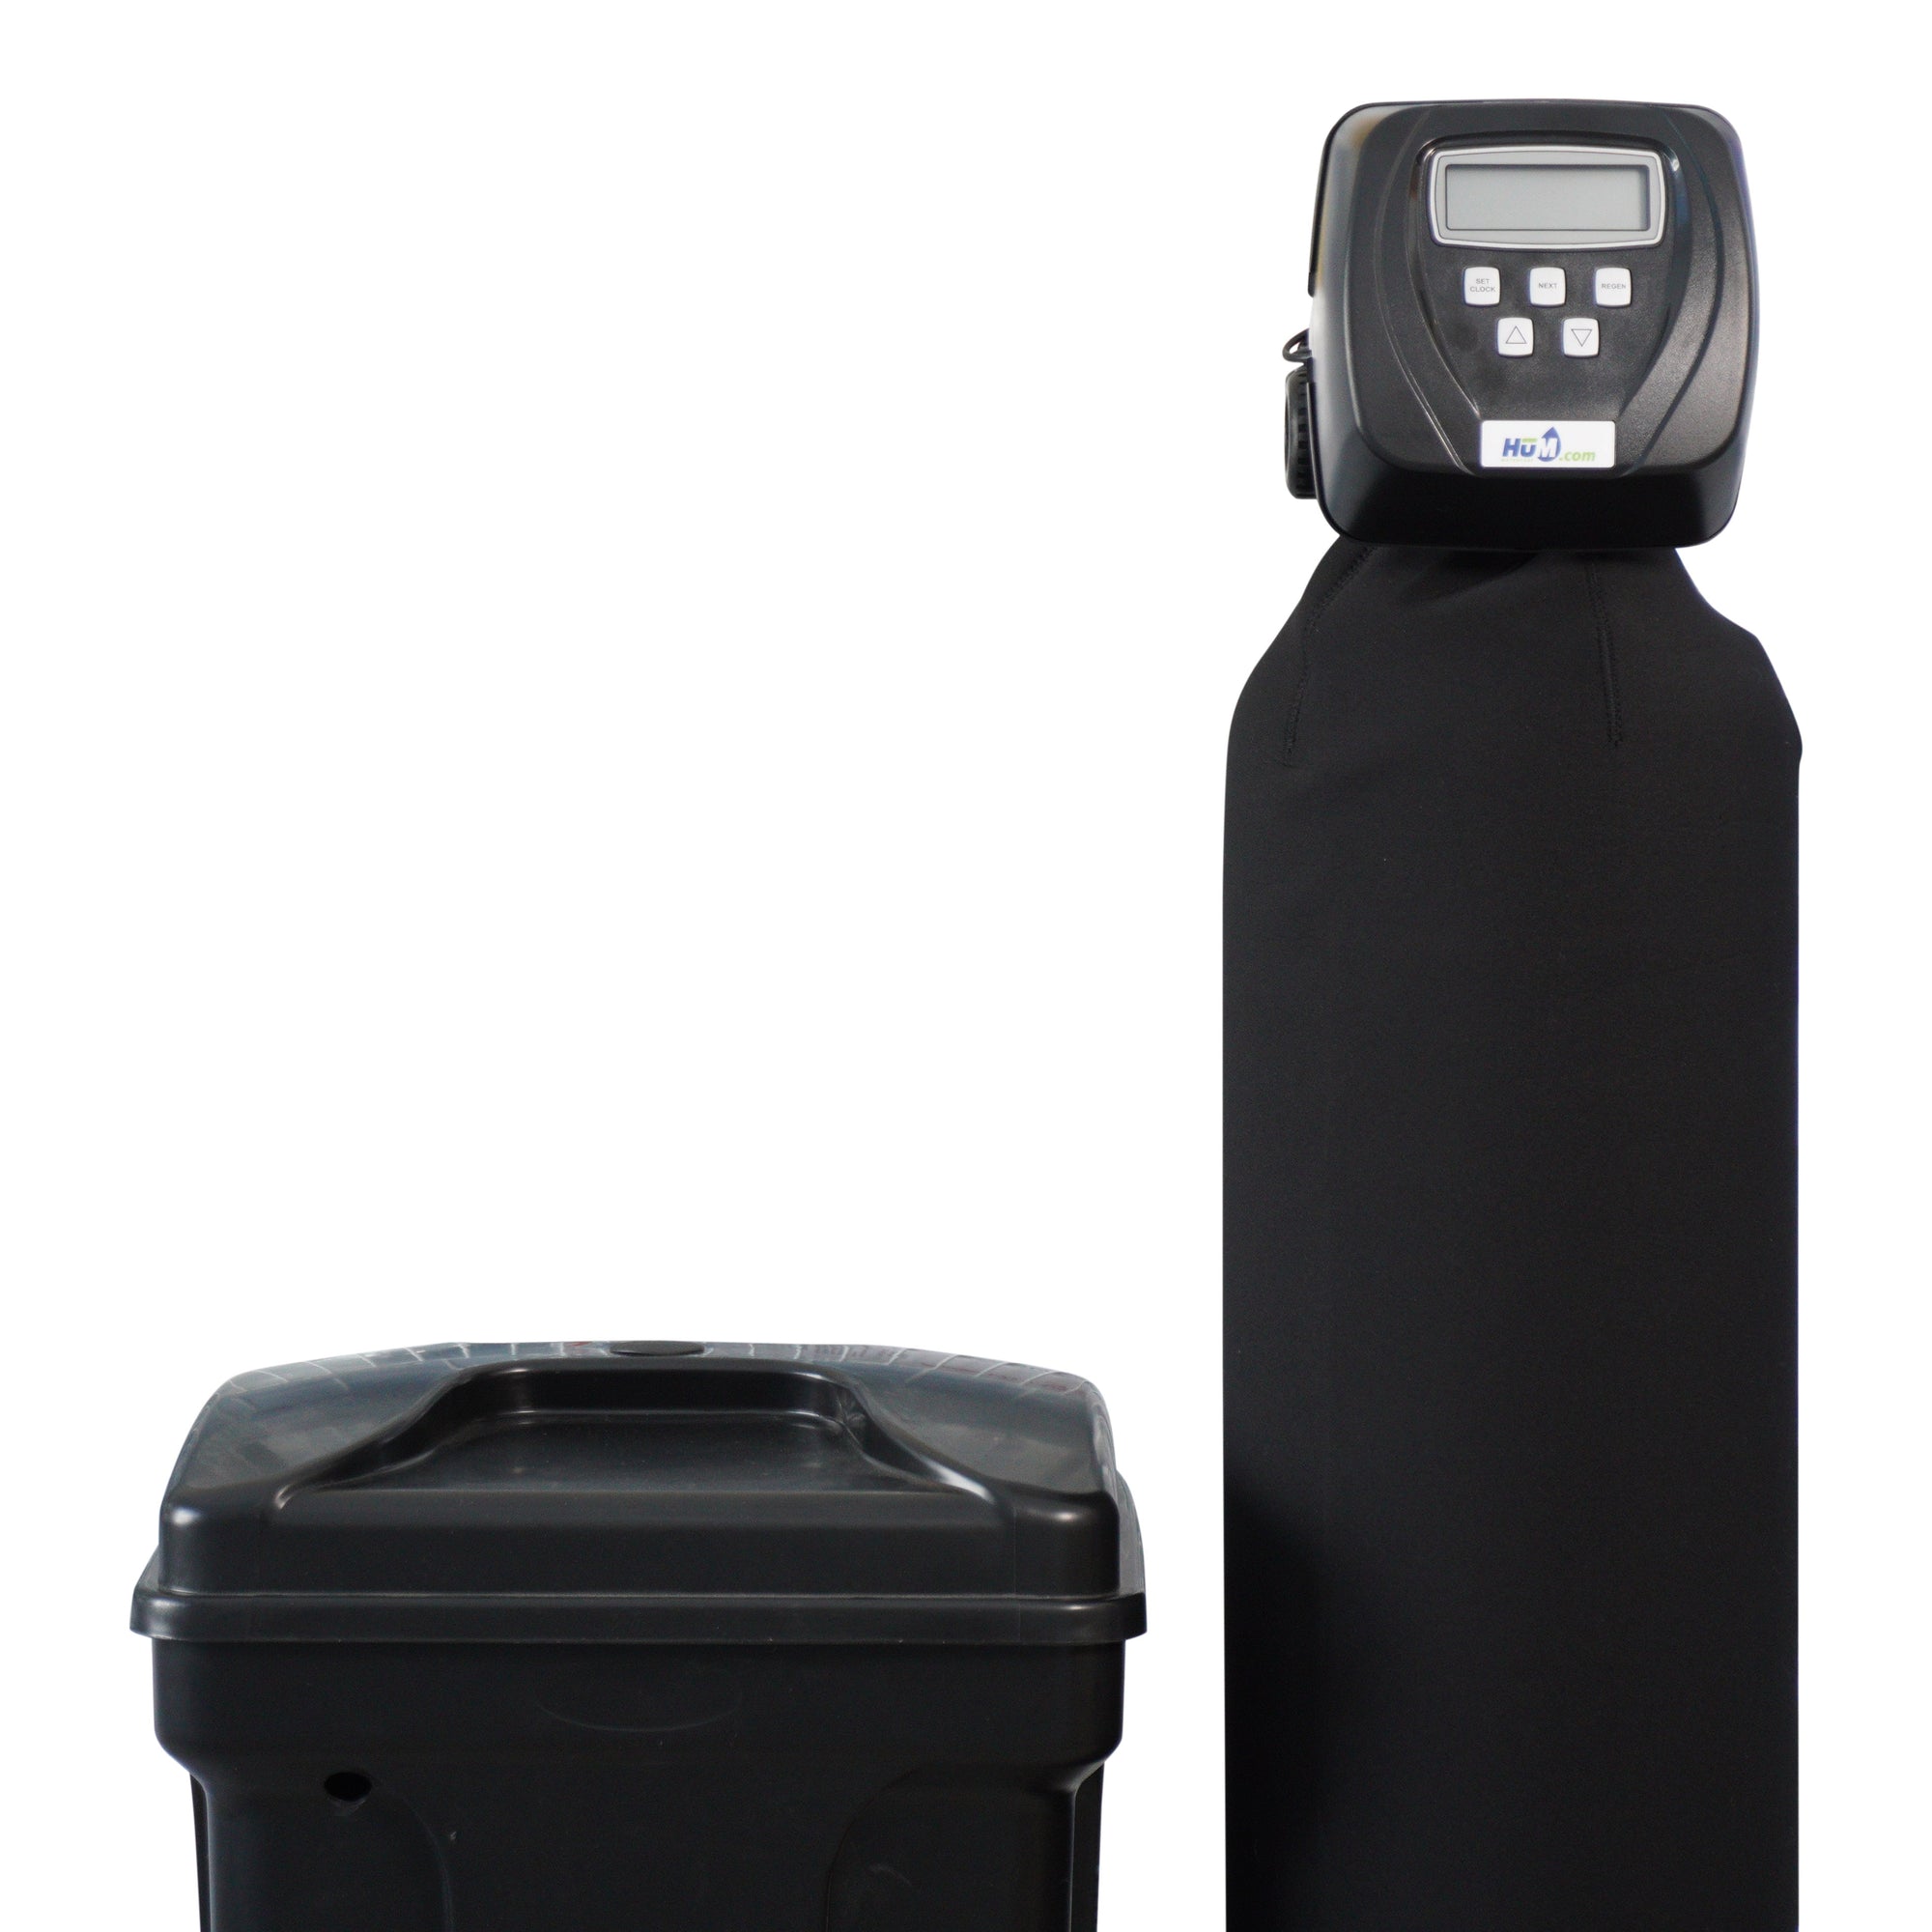 CAN WATER be TOO SOFT? Water Softener TROUBLESHOOTING